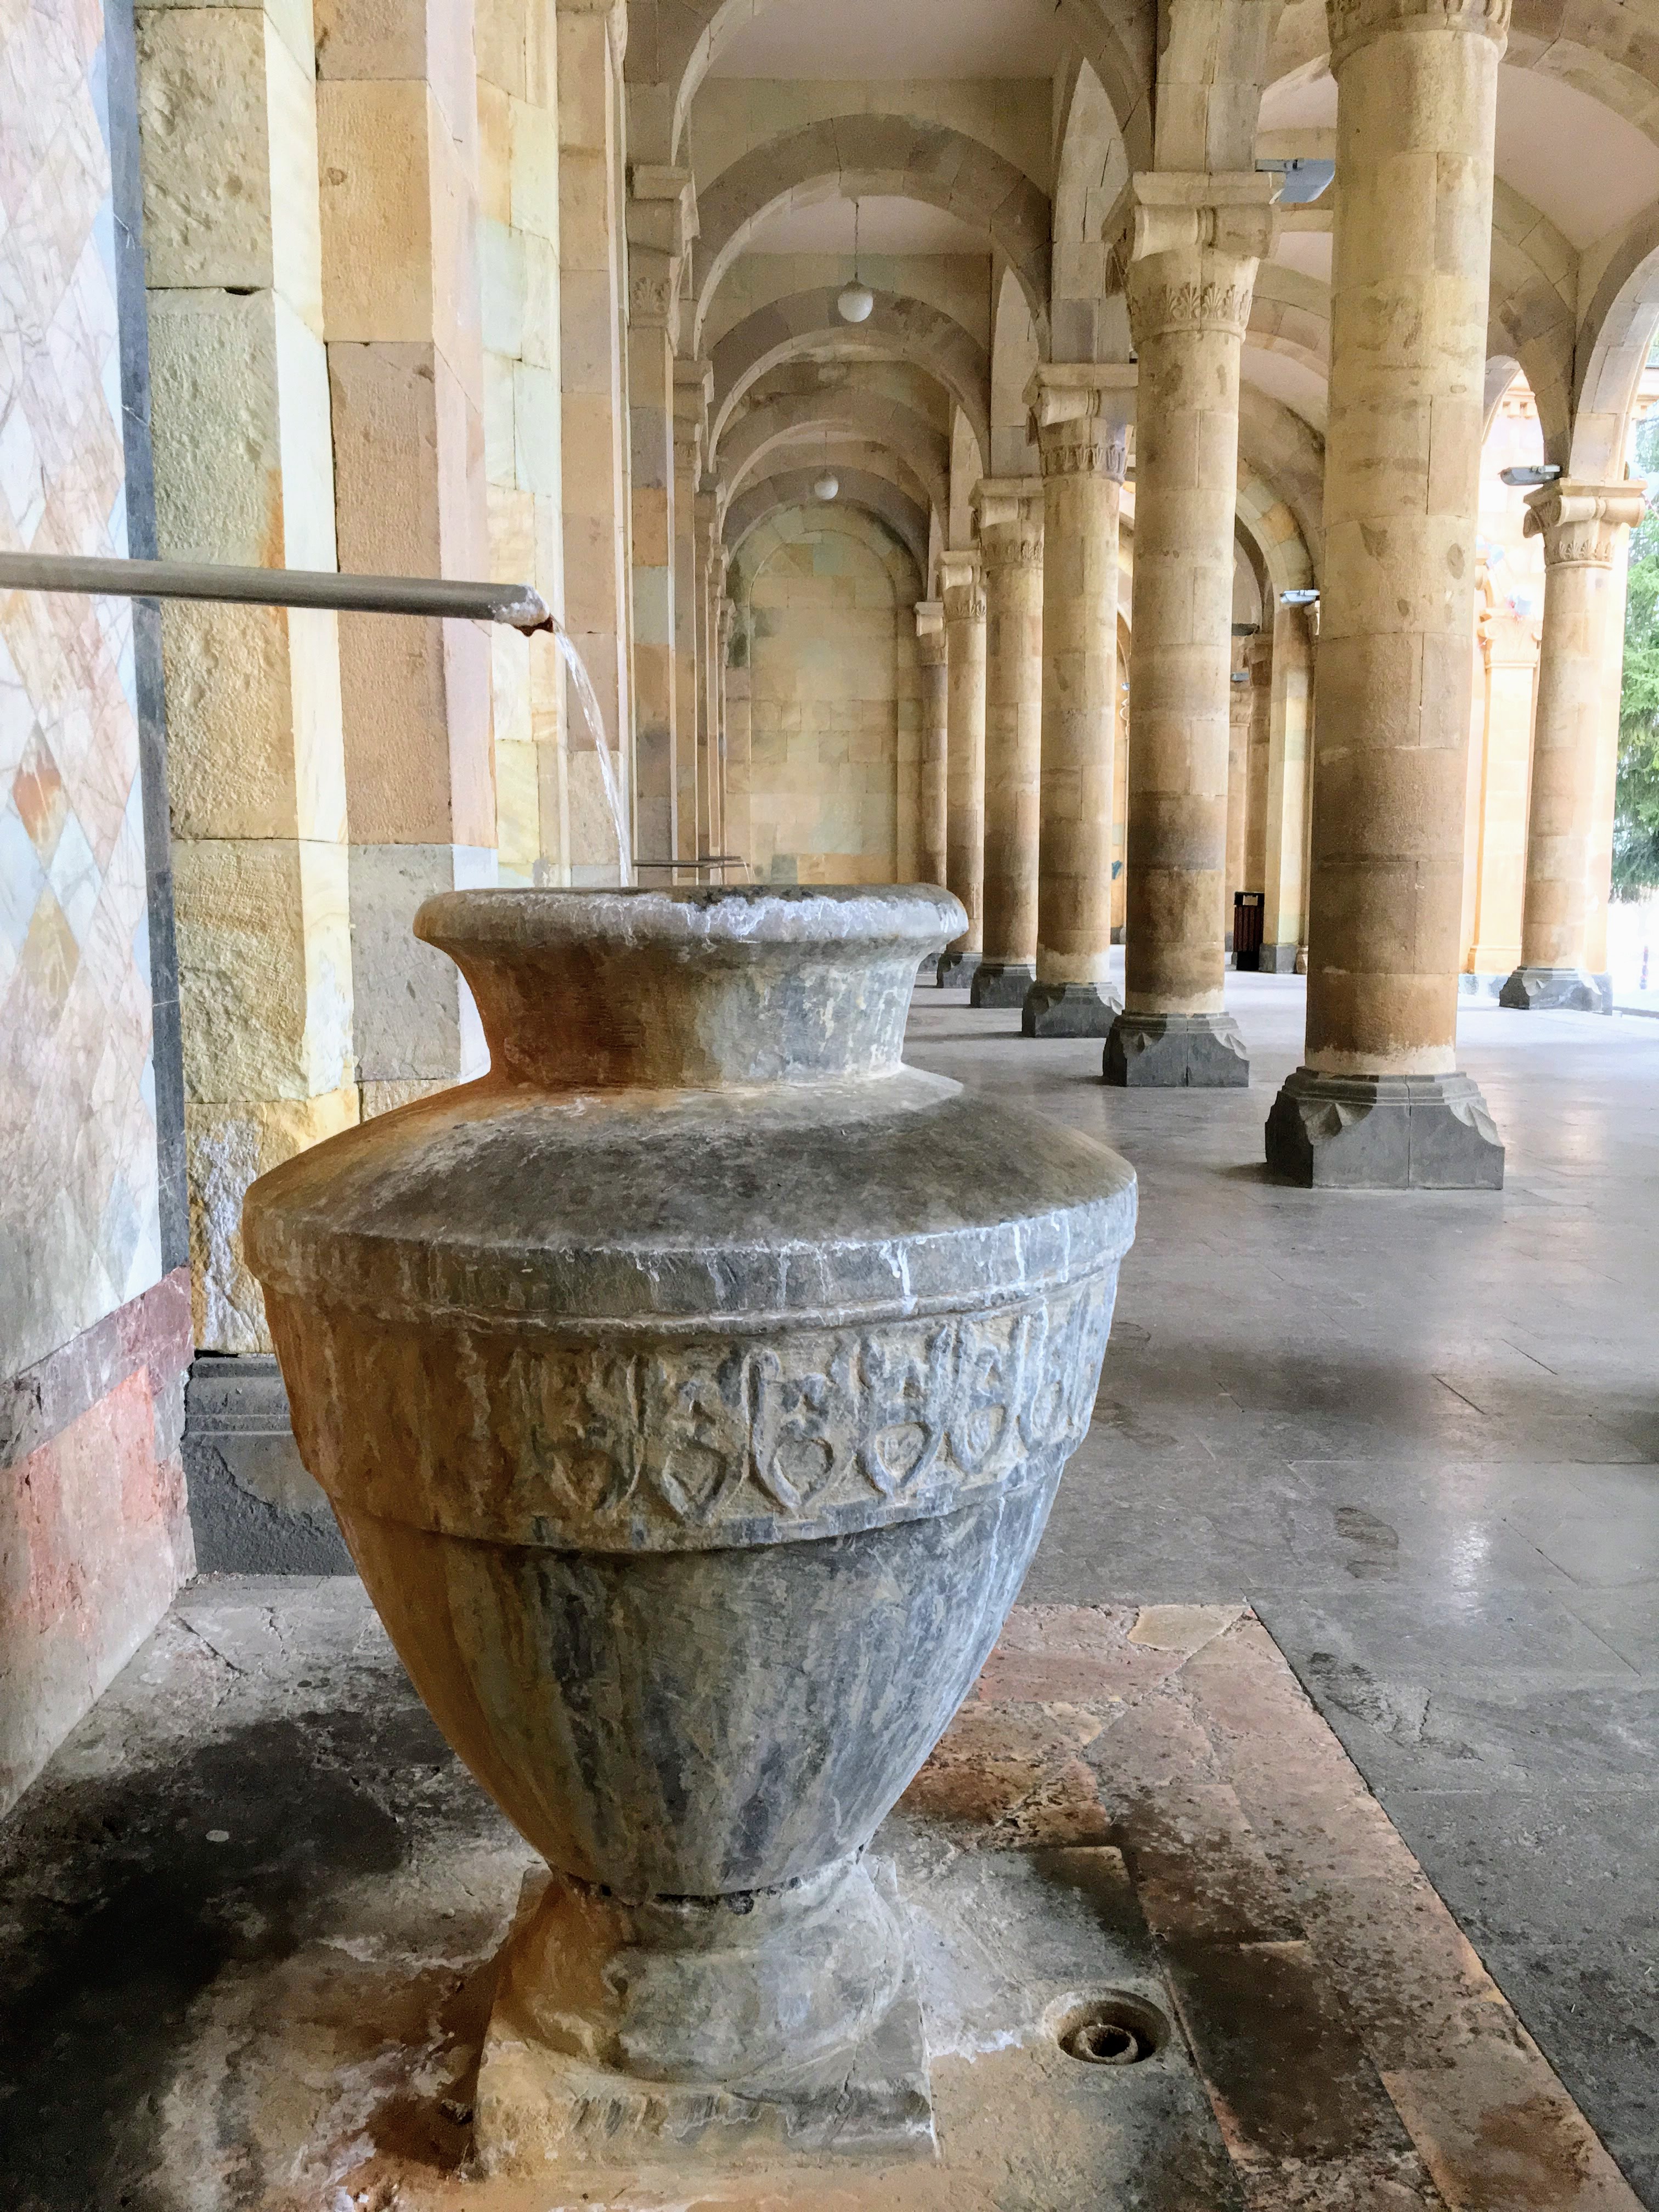 Healing mineral water from Jermuk, Armenia